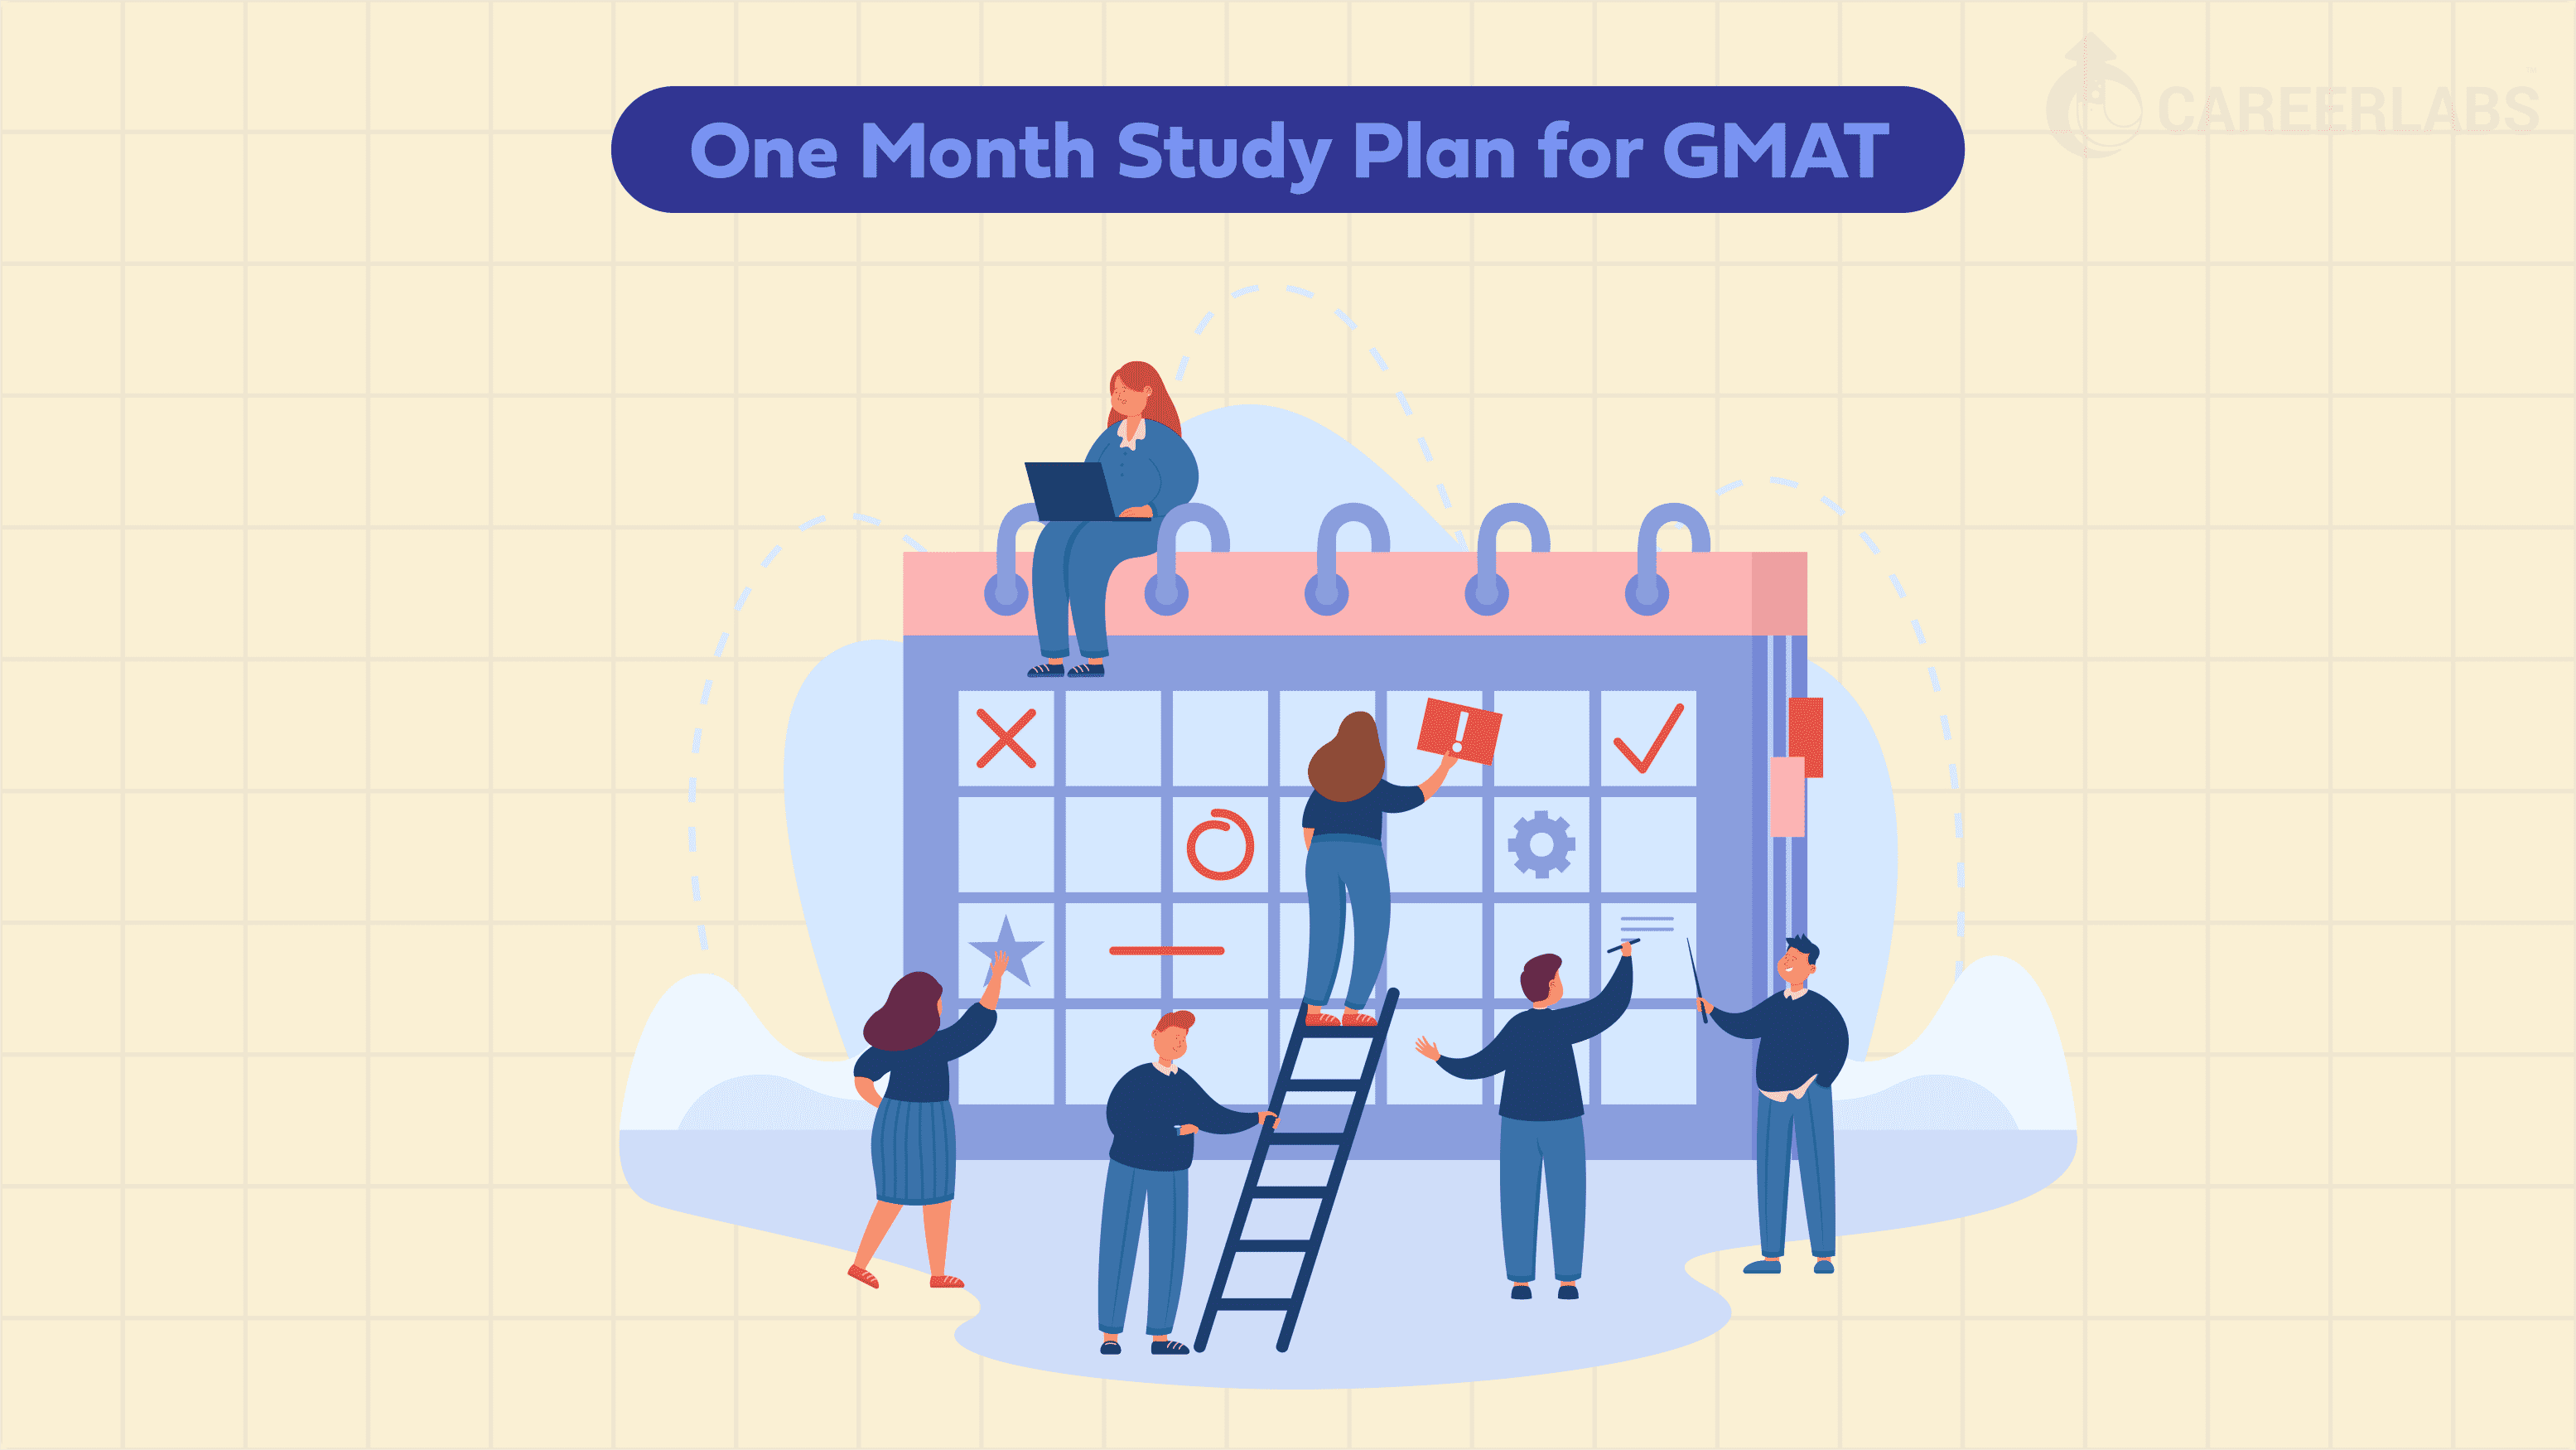 One Month Study Plan to Prepare for GMAT